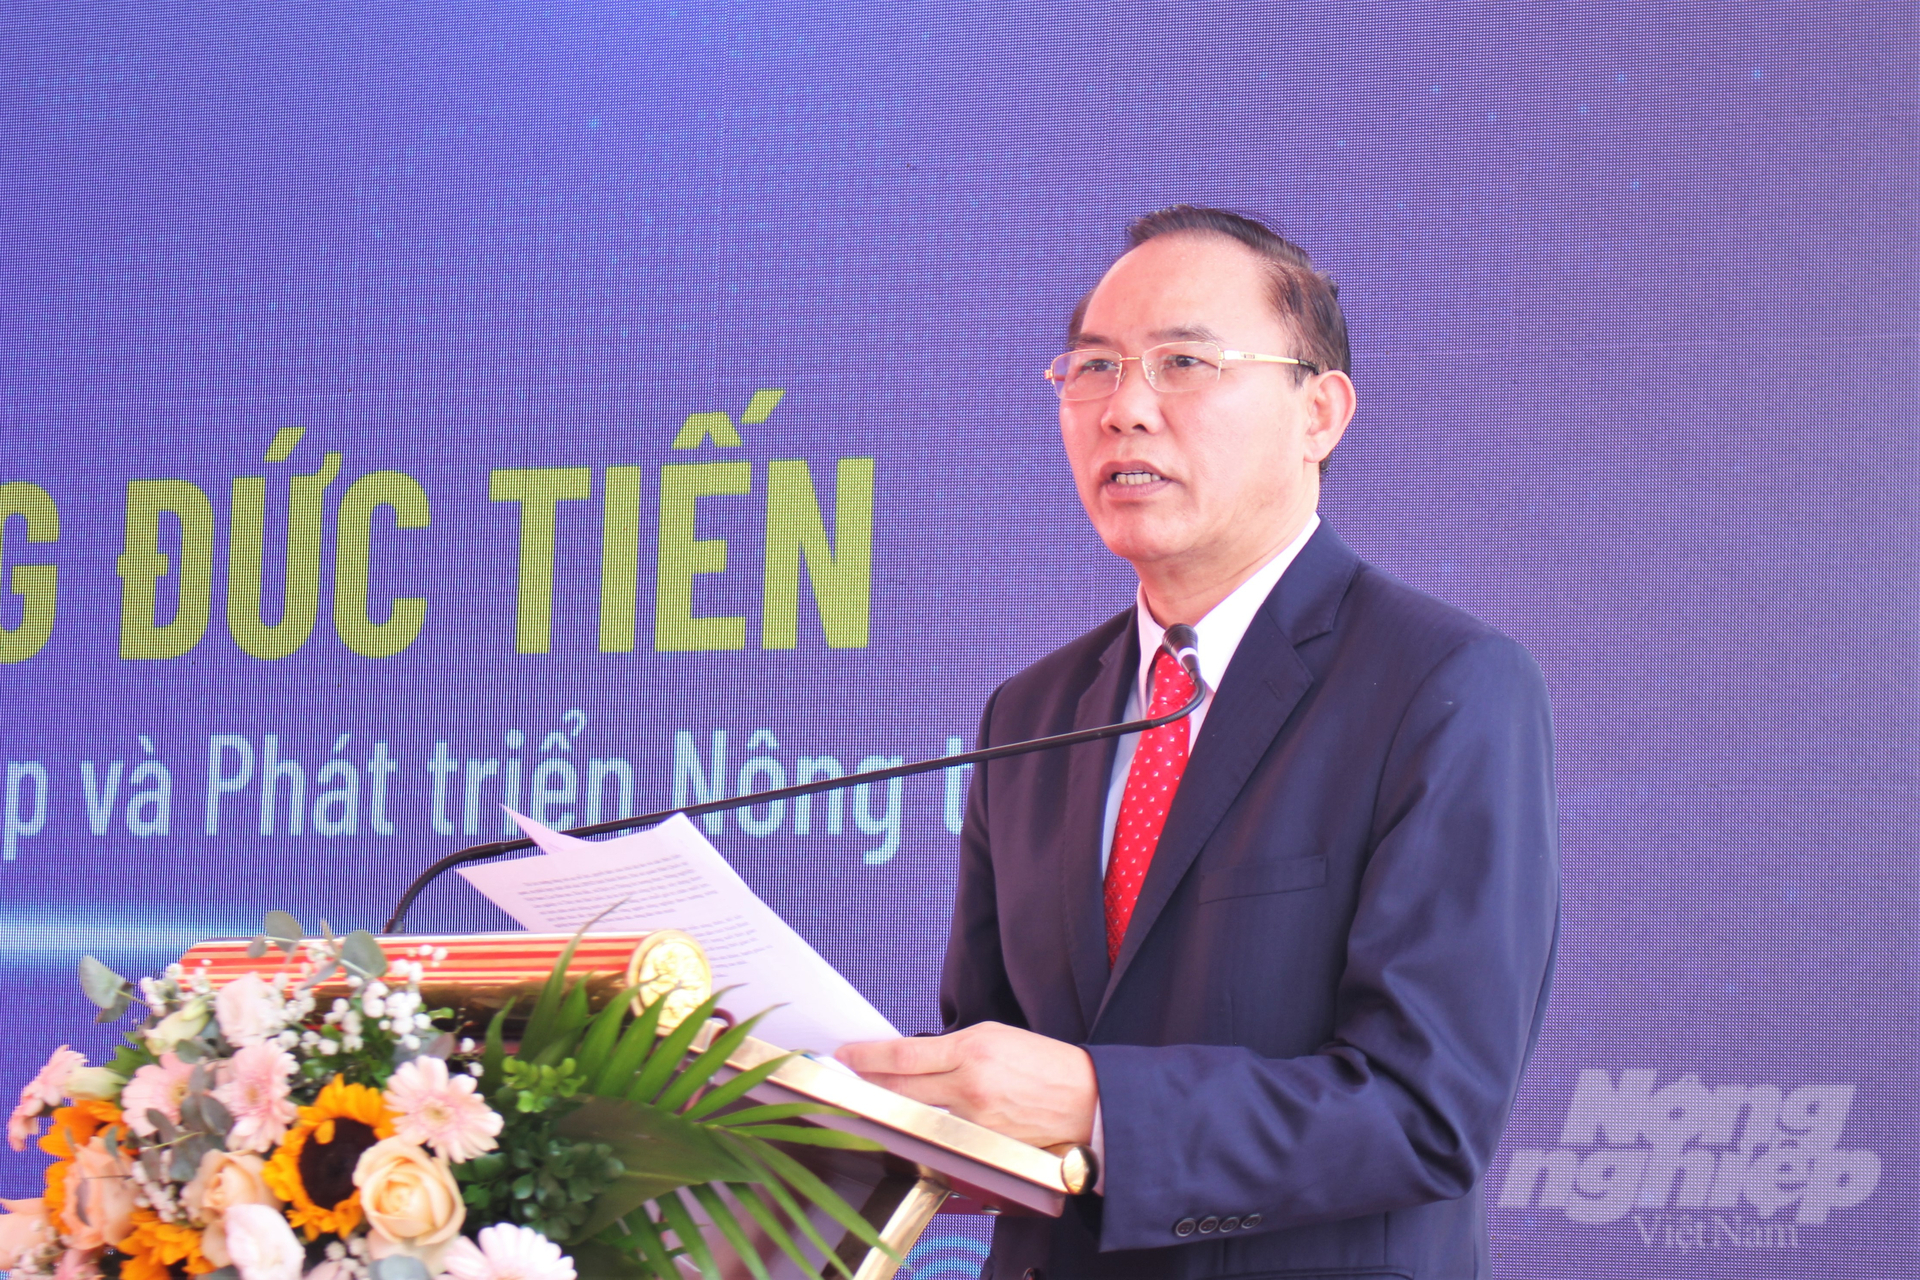 Deputy Minister of Agriculture and Rural Development Phung Duc Tien expects the project to create a typical clean agricultural product production and consumption model, with high competitiveness, increasing income for farmers. Photo: Trung Quan.